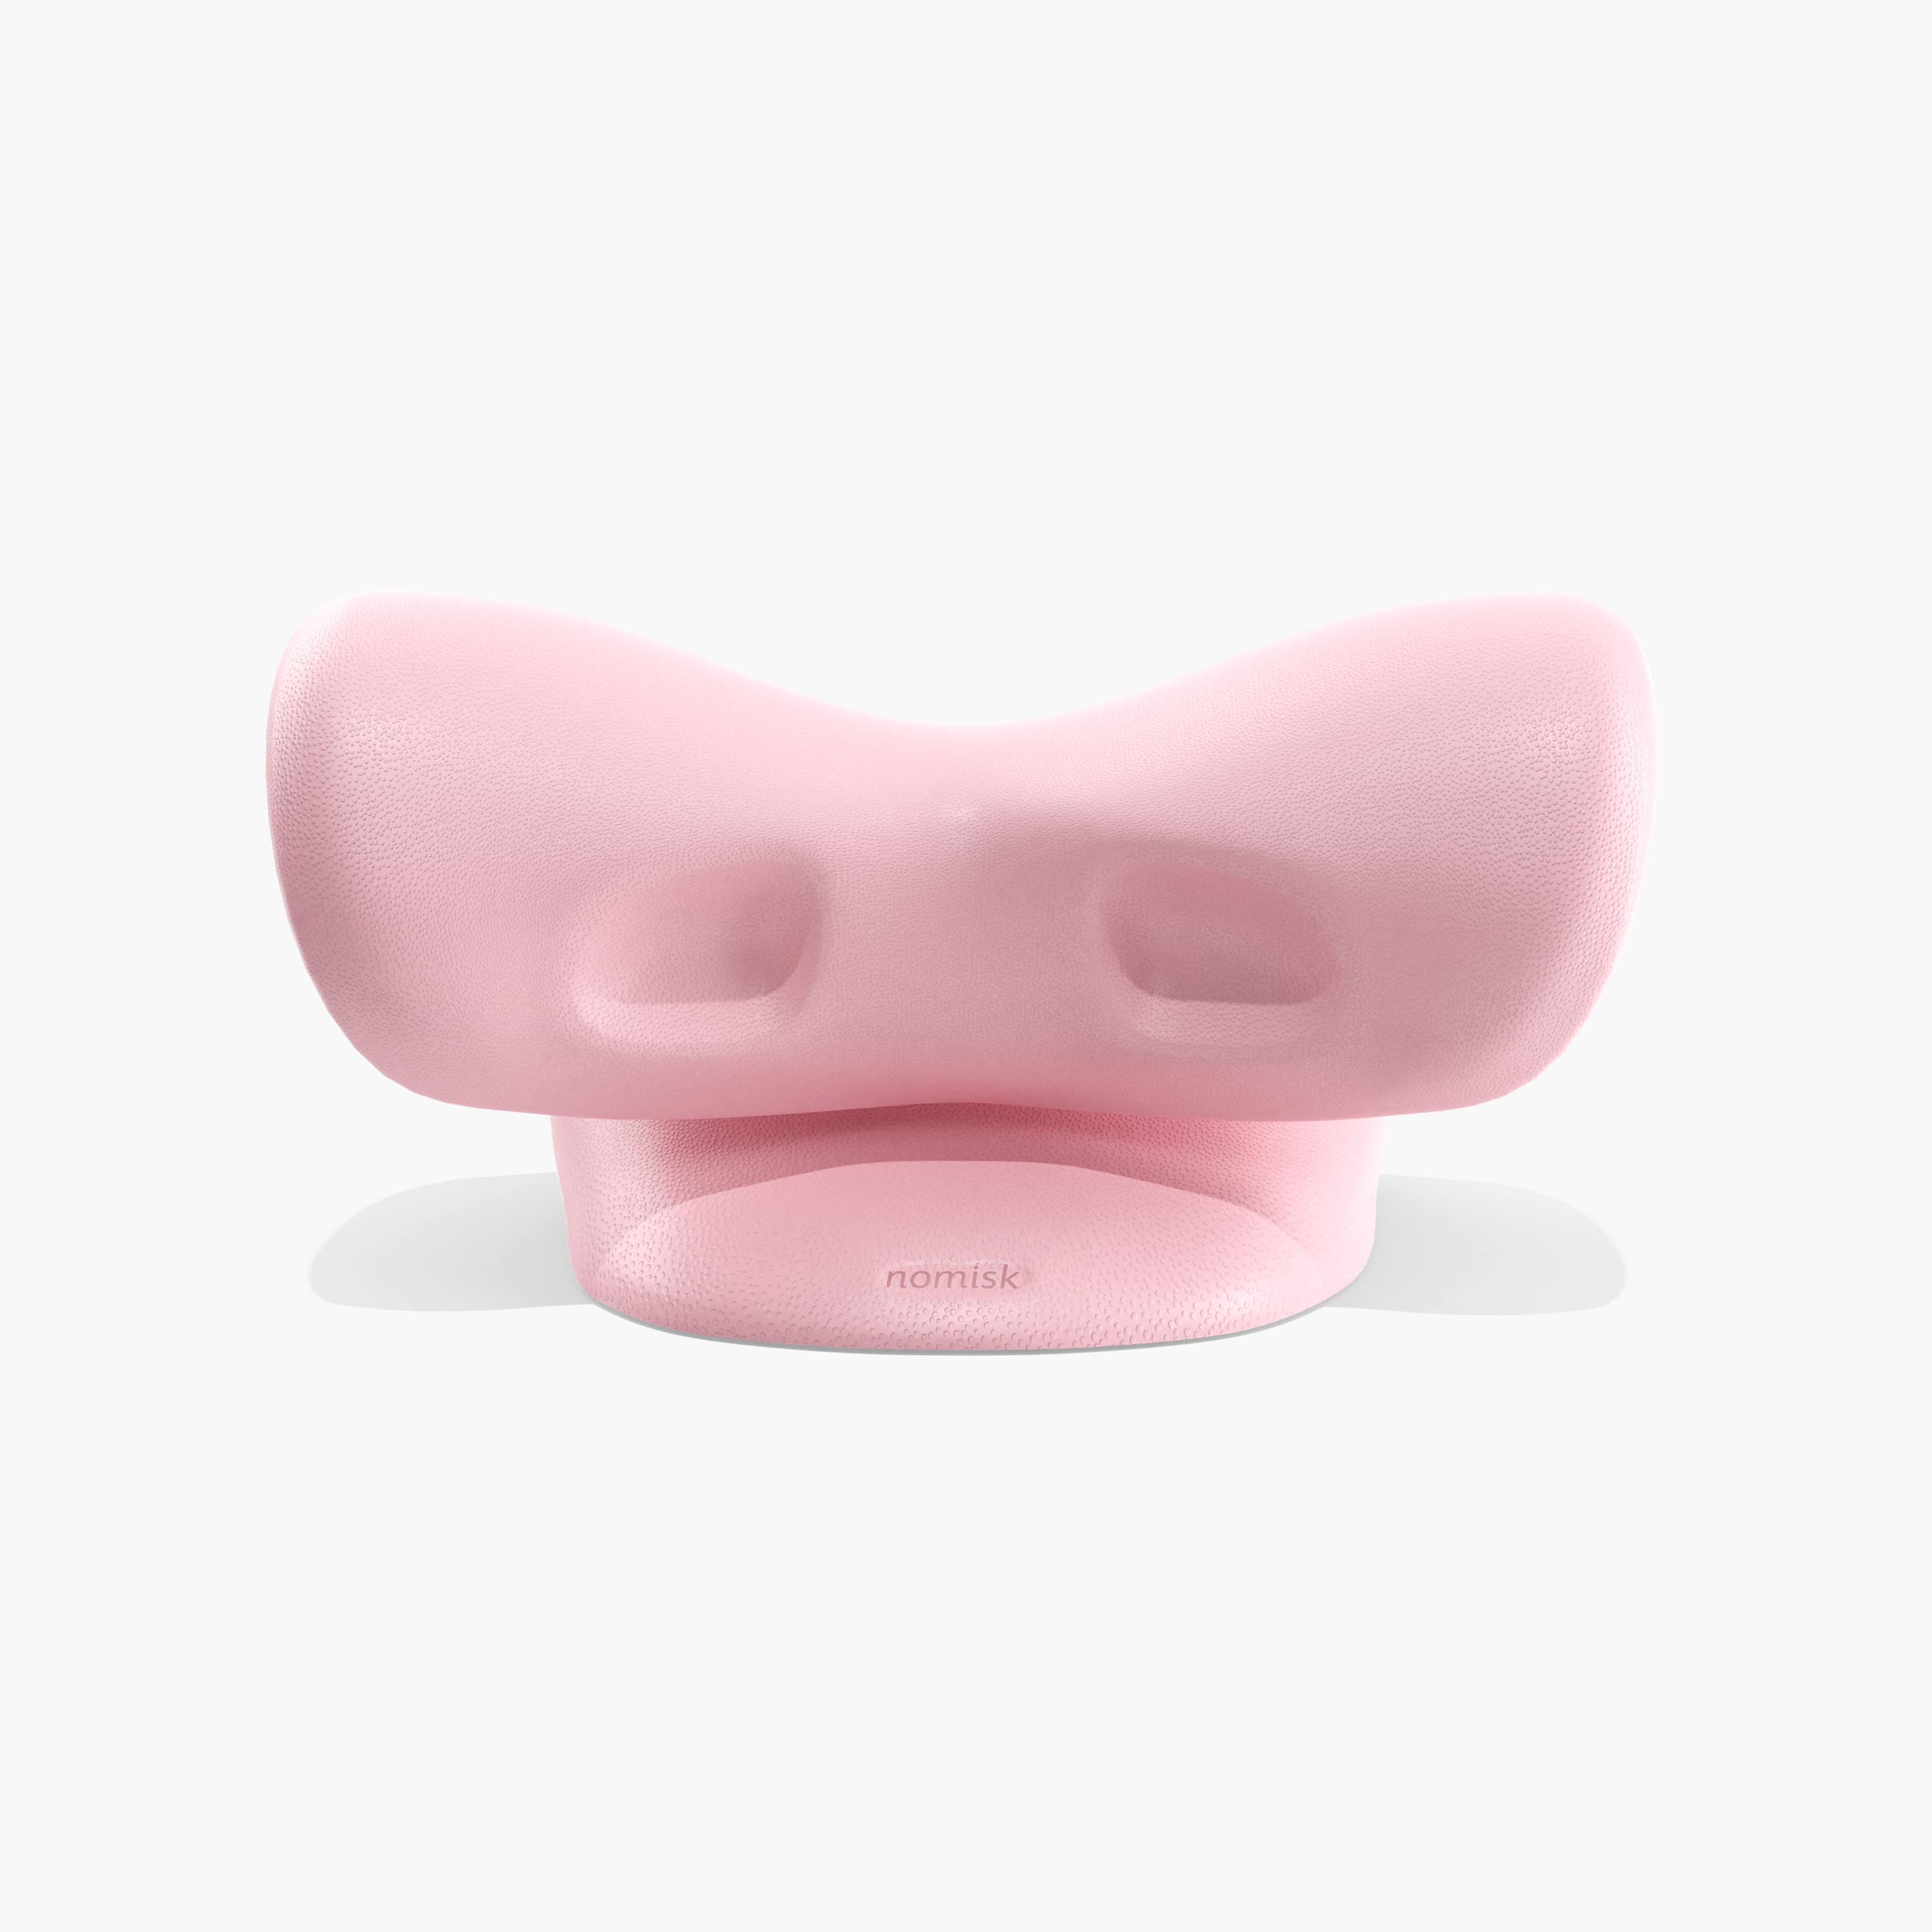 Juno by Nomisk. A pink cervical traction pillow that instantly relieves neck pain. Relieve tension, improve sleep, posture and blood flow by using Juno to stretch out your neck. Shown here from a rear view.